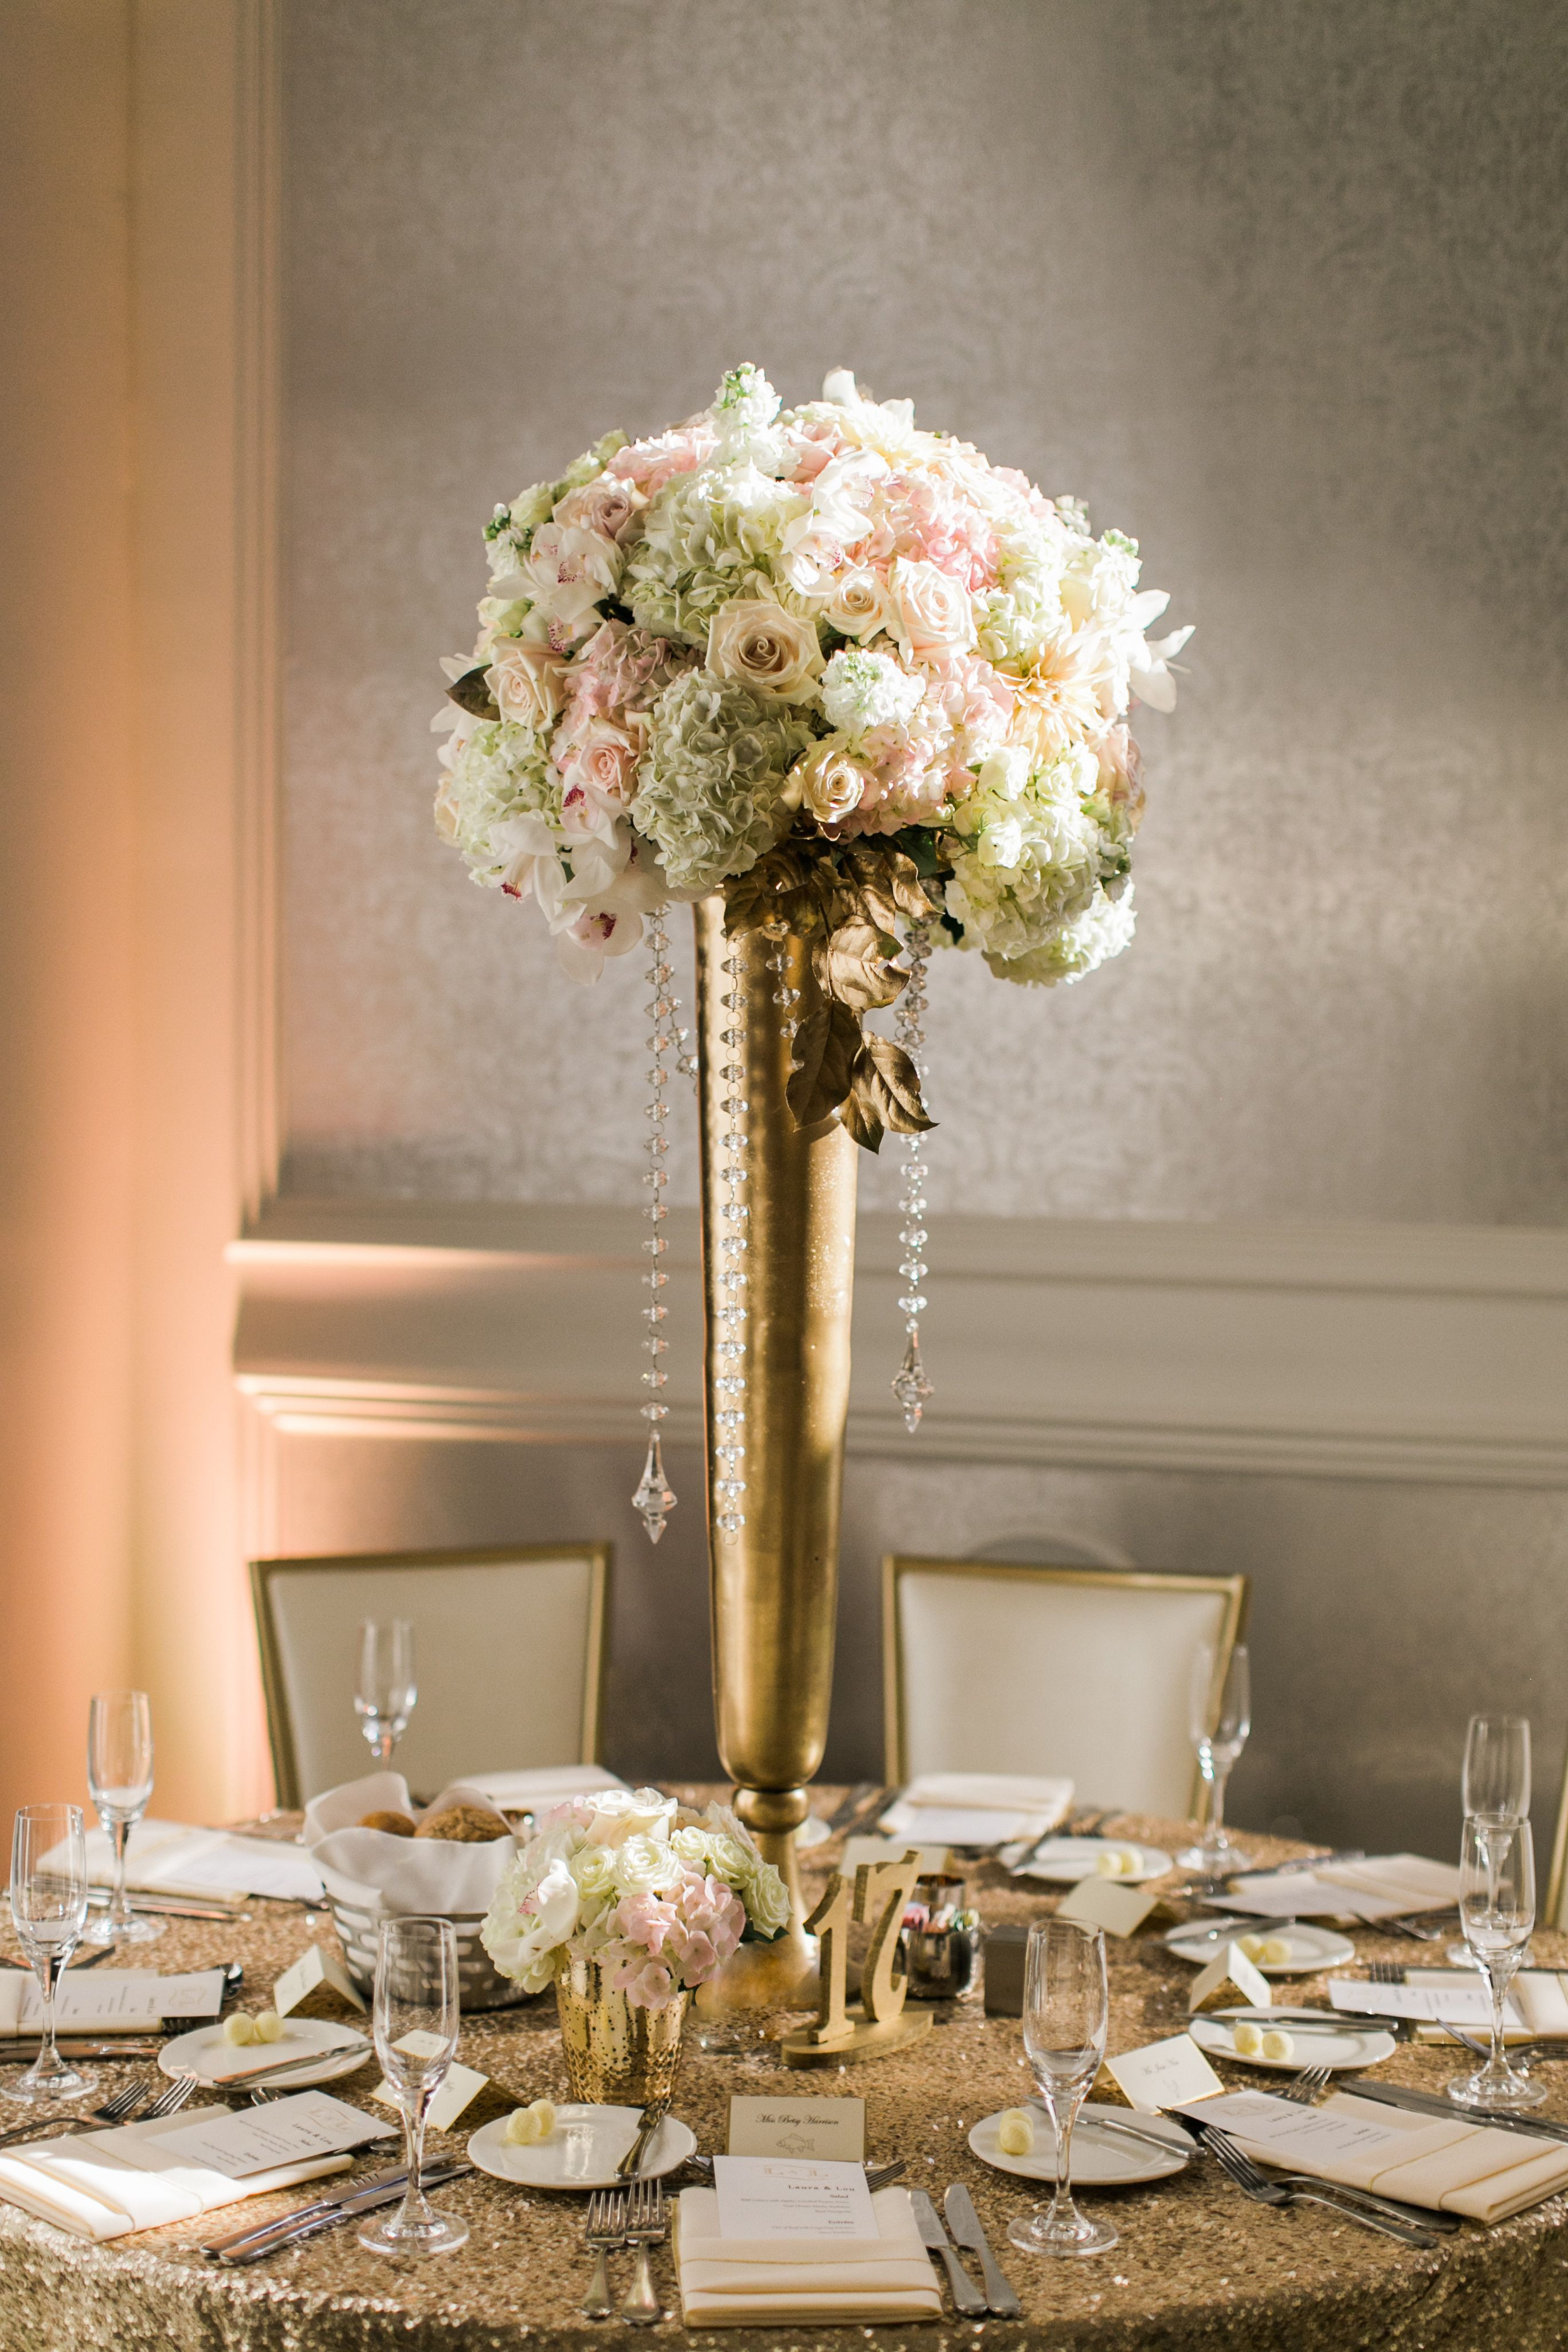 10 Popular Milk Vases for Centerpieces 2022 free download milk vases for centerpieces of tall gold vase gallery eb0a9714h vases pote vase gold carraway vasei with regard to tall gold vase image 33 new tall gold centerpieces of tall gold vase galler